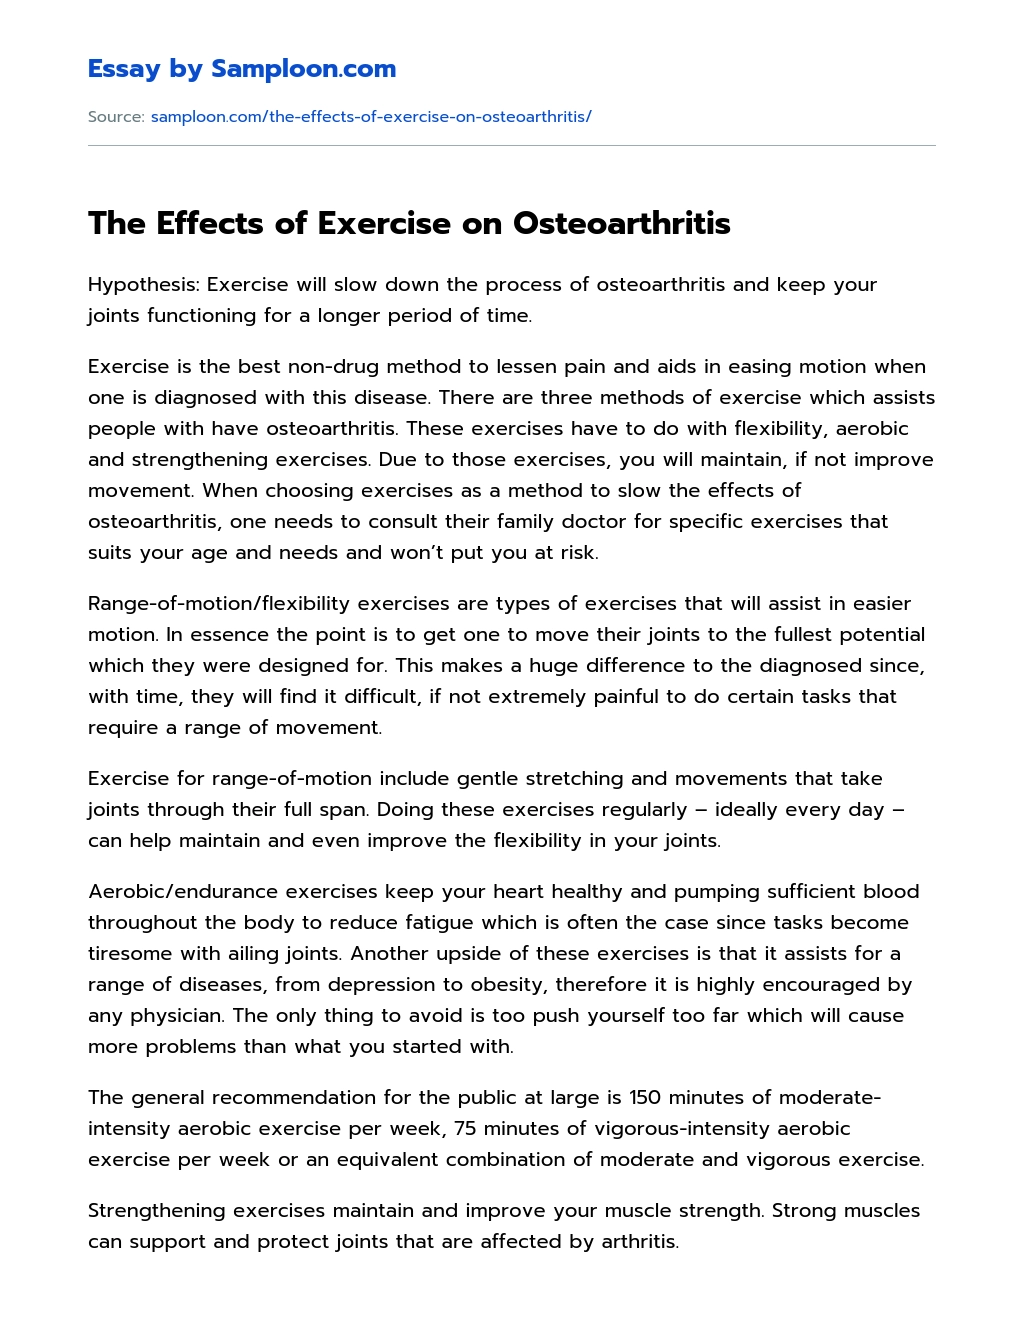 The Effects of Exercise on Osteoarthritis essay